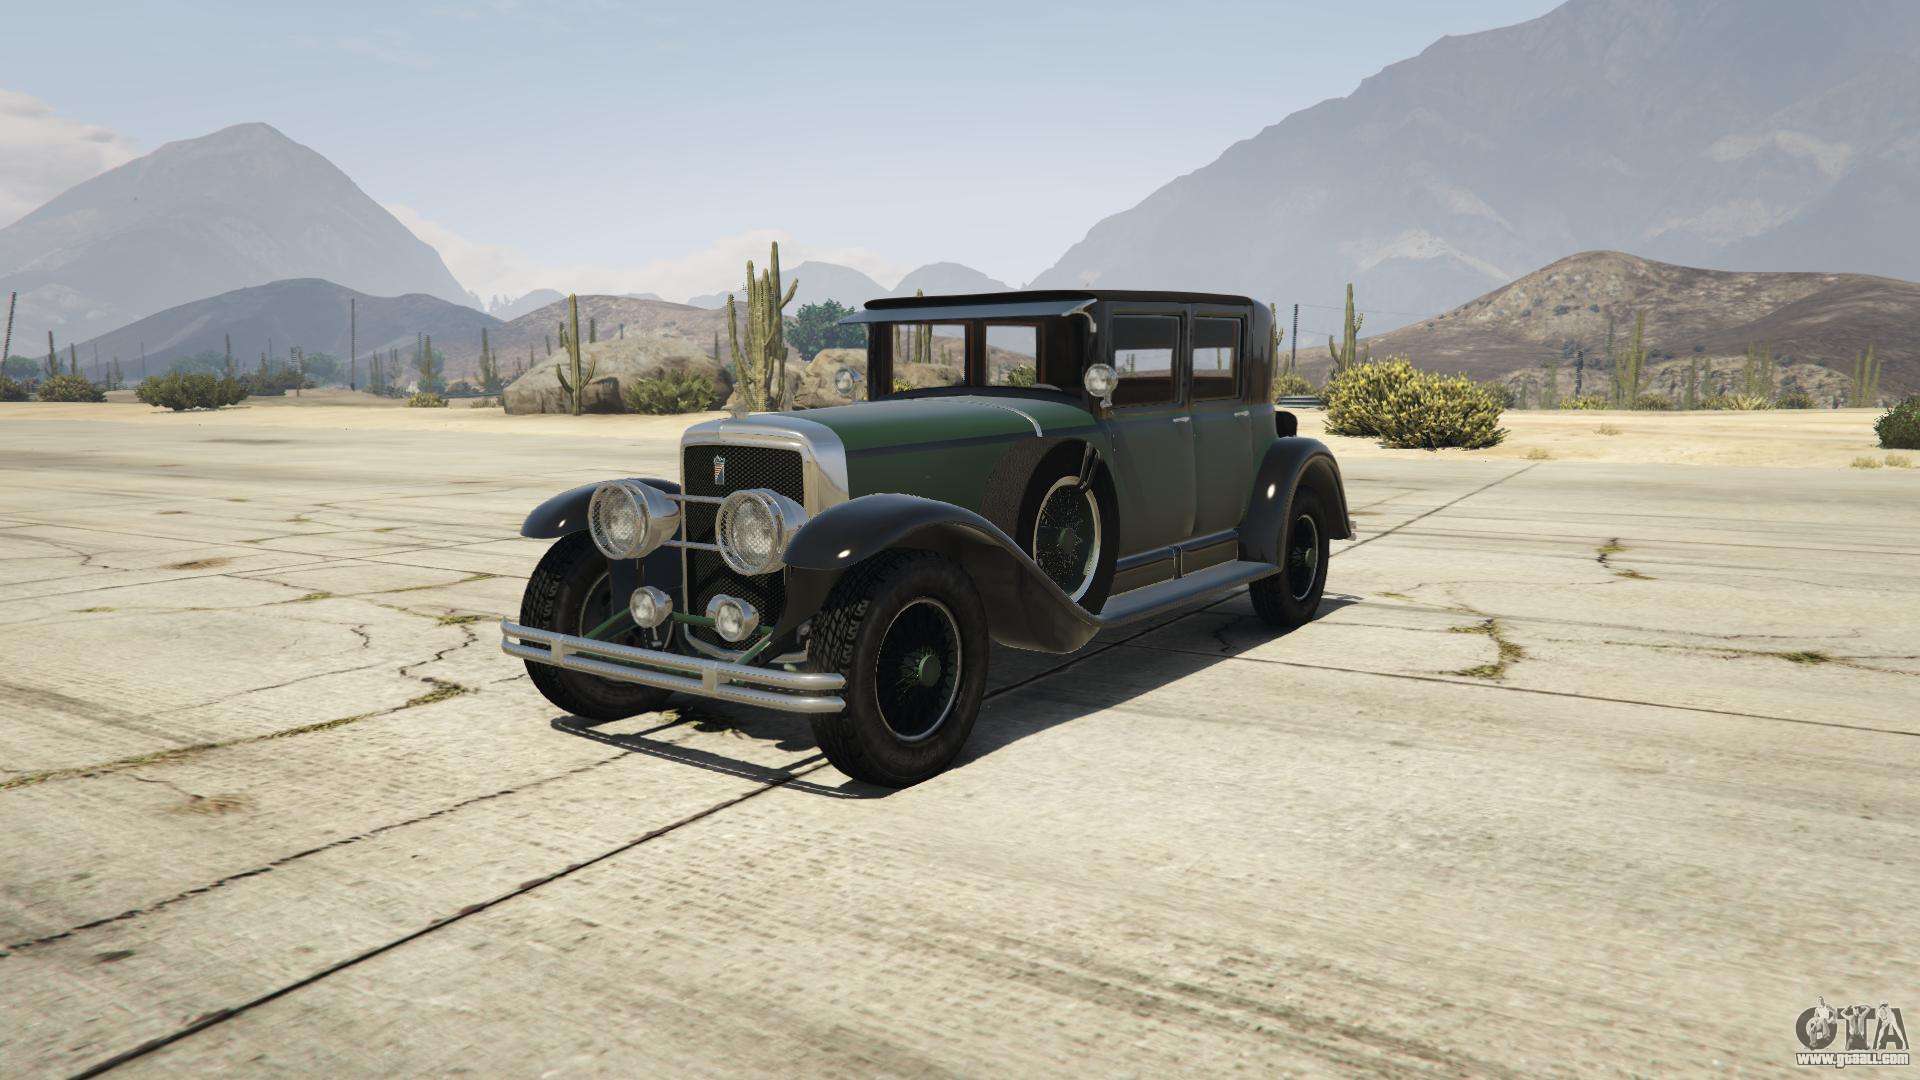 Albany Roosevelt GTA 5 - front view